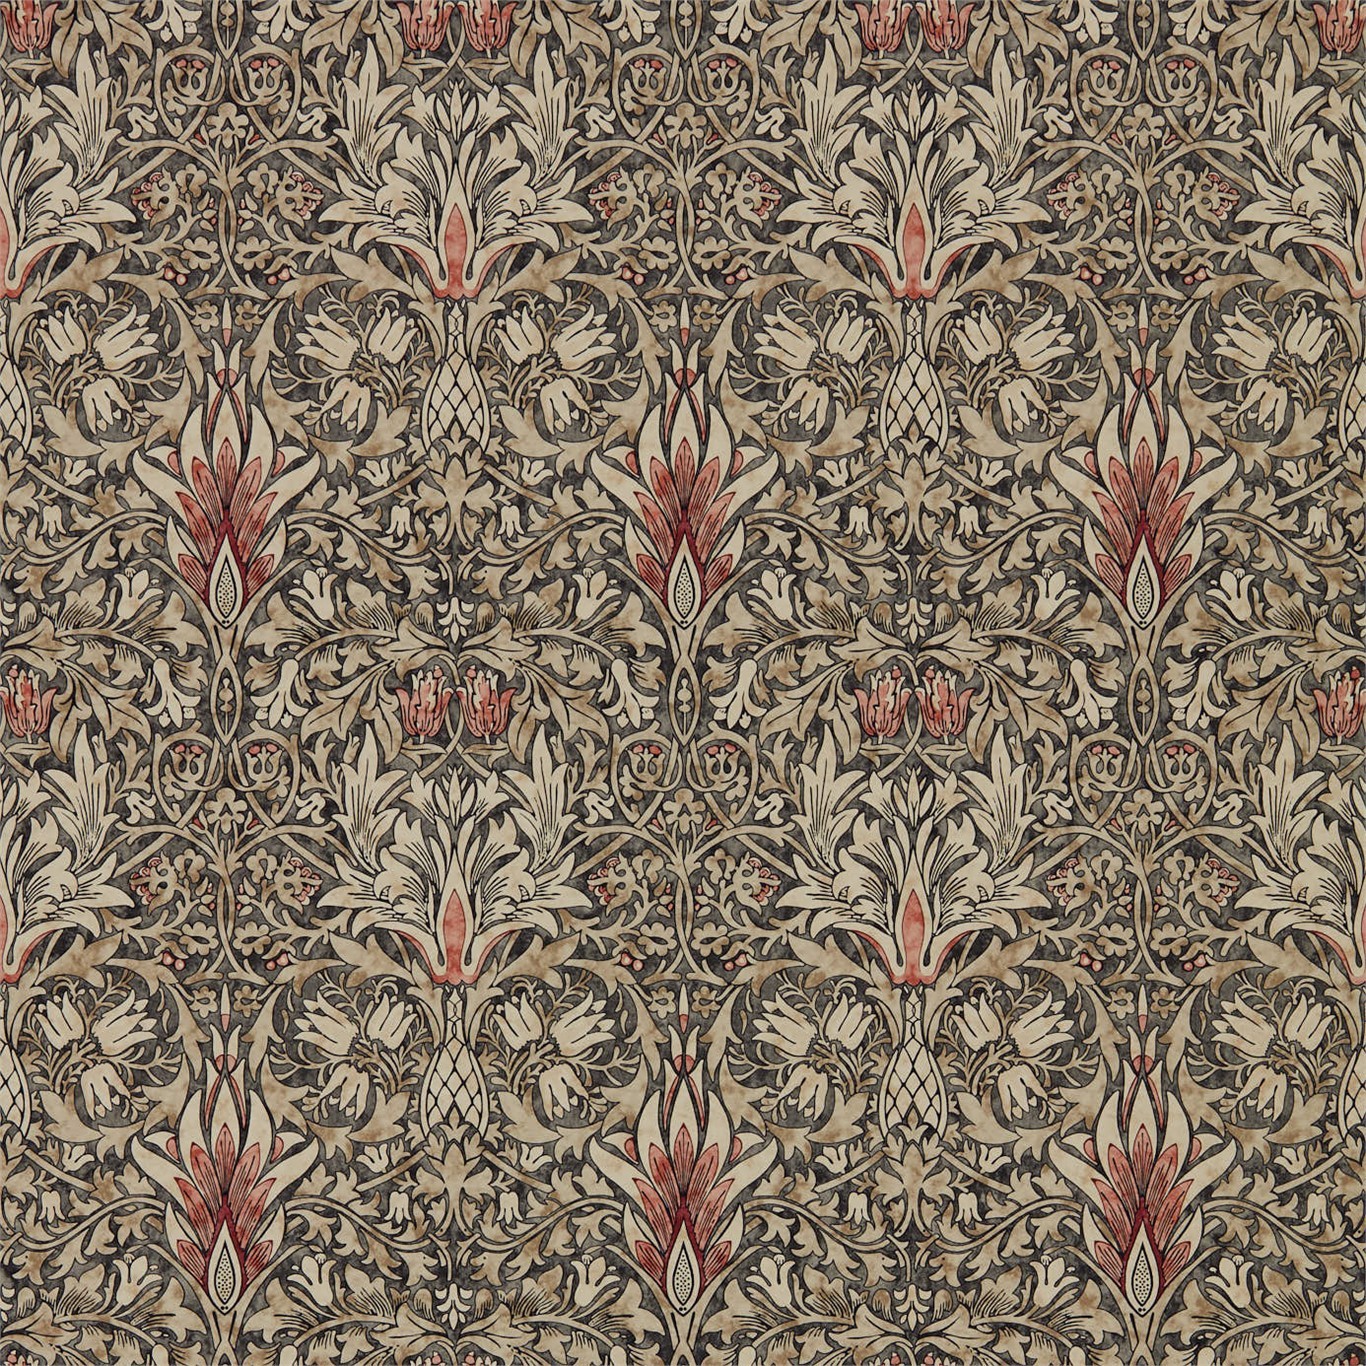 a brown and red floral pattern on fabric